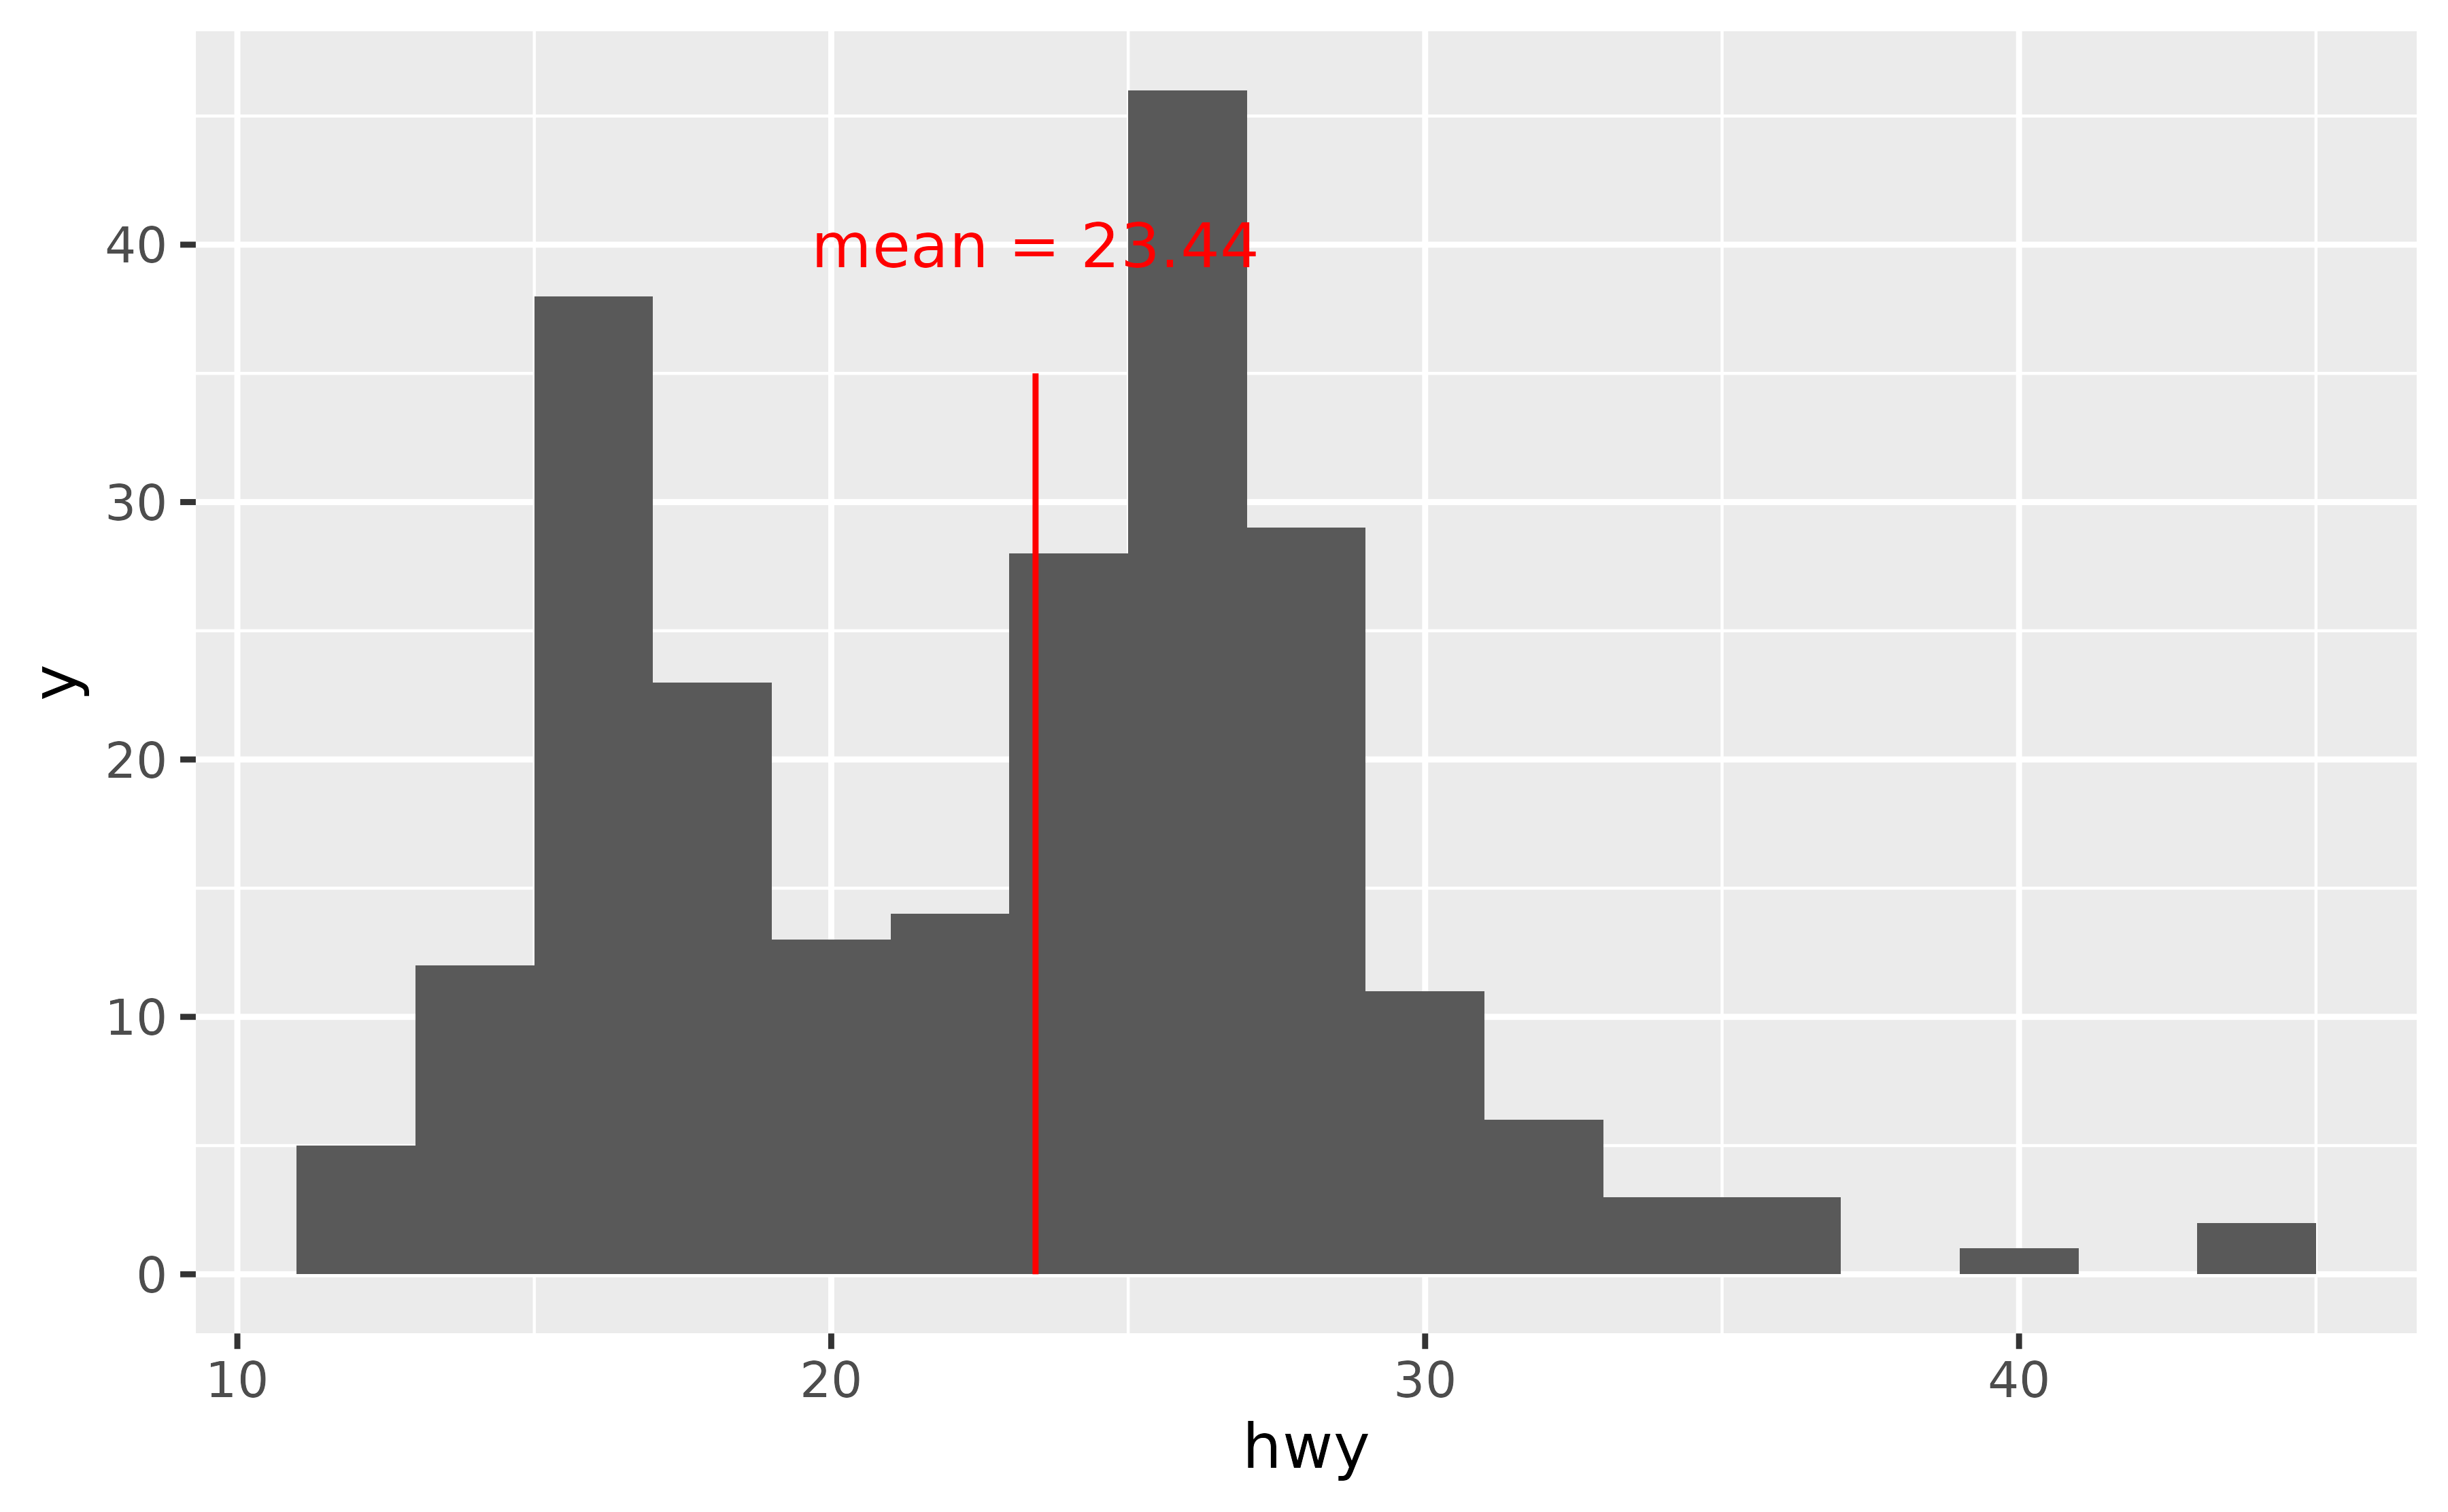 Histogram of highway miles per gallon for 234 cars. A red line is placed at the position 23.44 and is adorned with the label 'mean = 23.44'. Both the line and the text appear crisp.